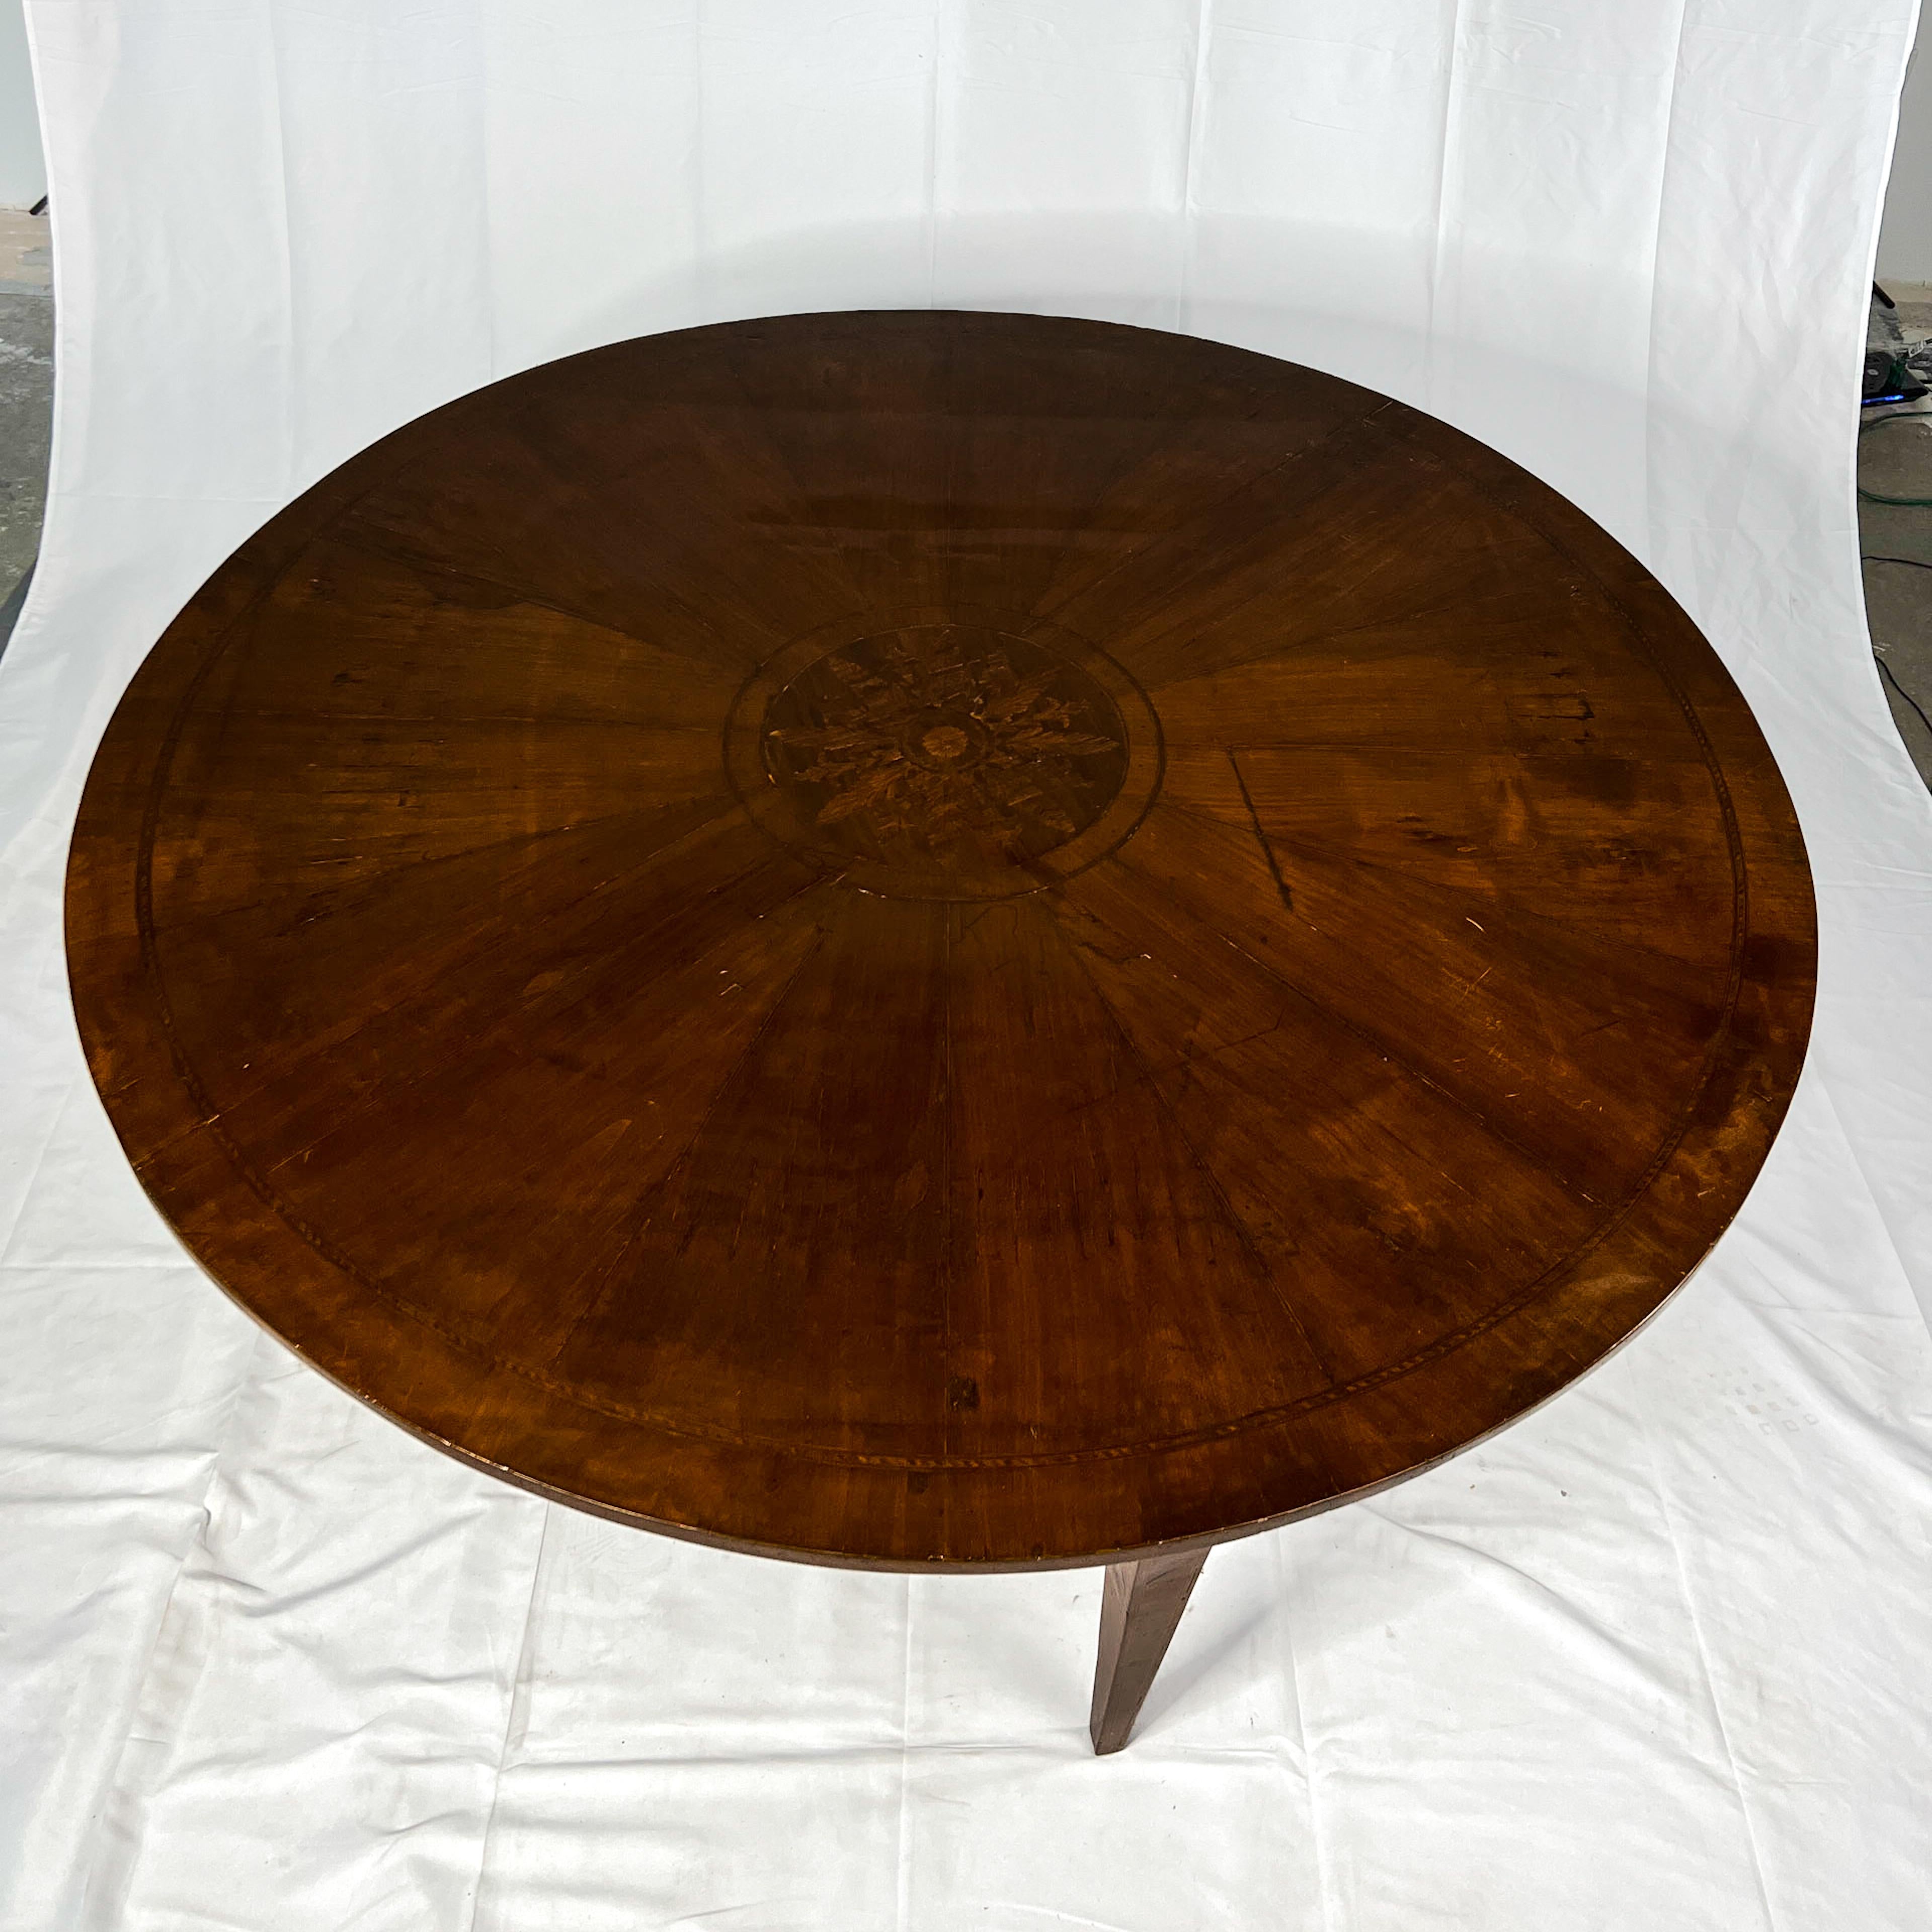 19th c. Italian neoclassical dining table with marquetry detail on the top surface. The four straight tapered legs and the apron also have inlay and stringing detail.